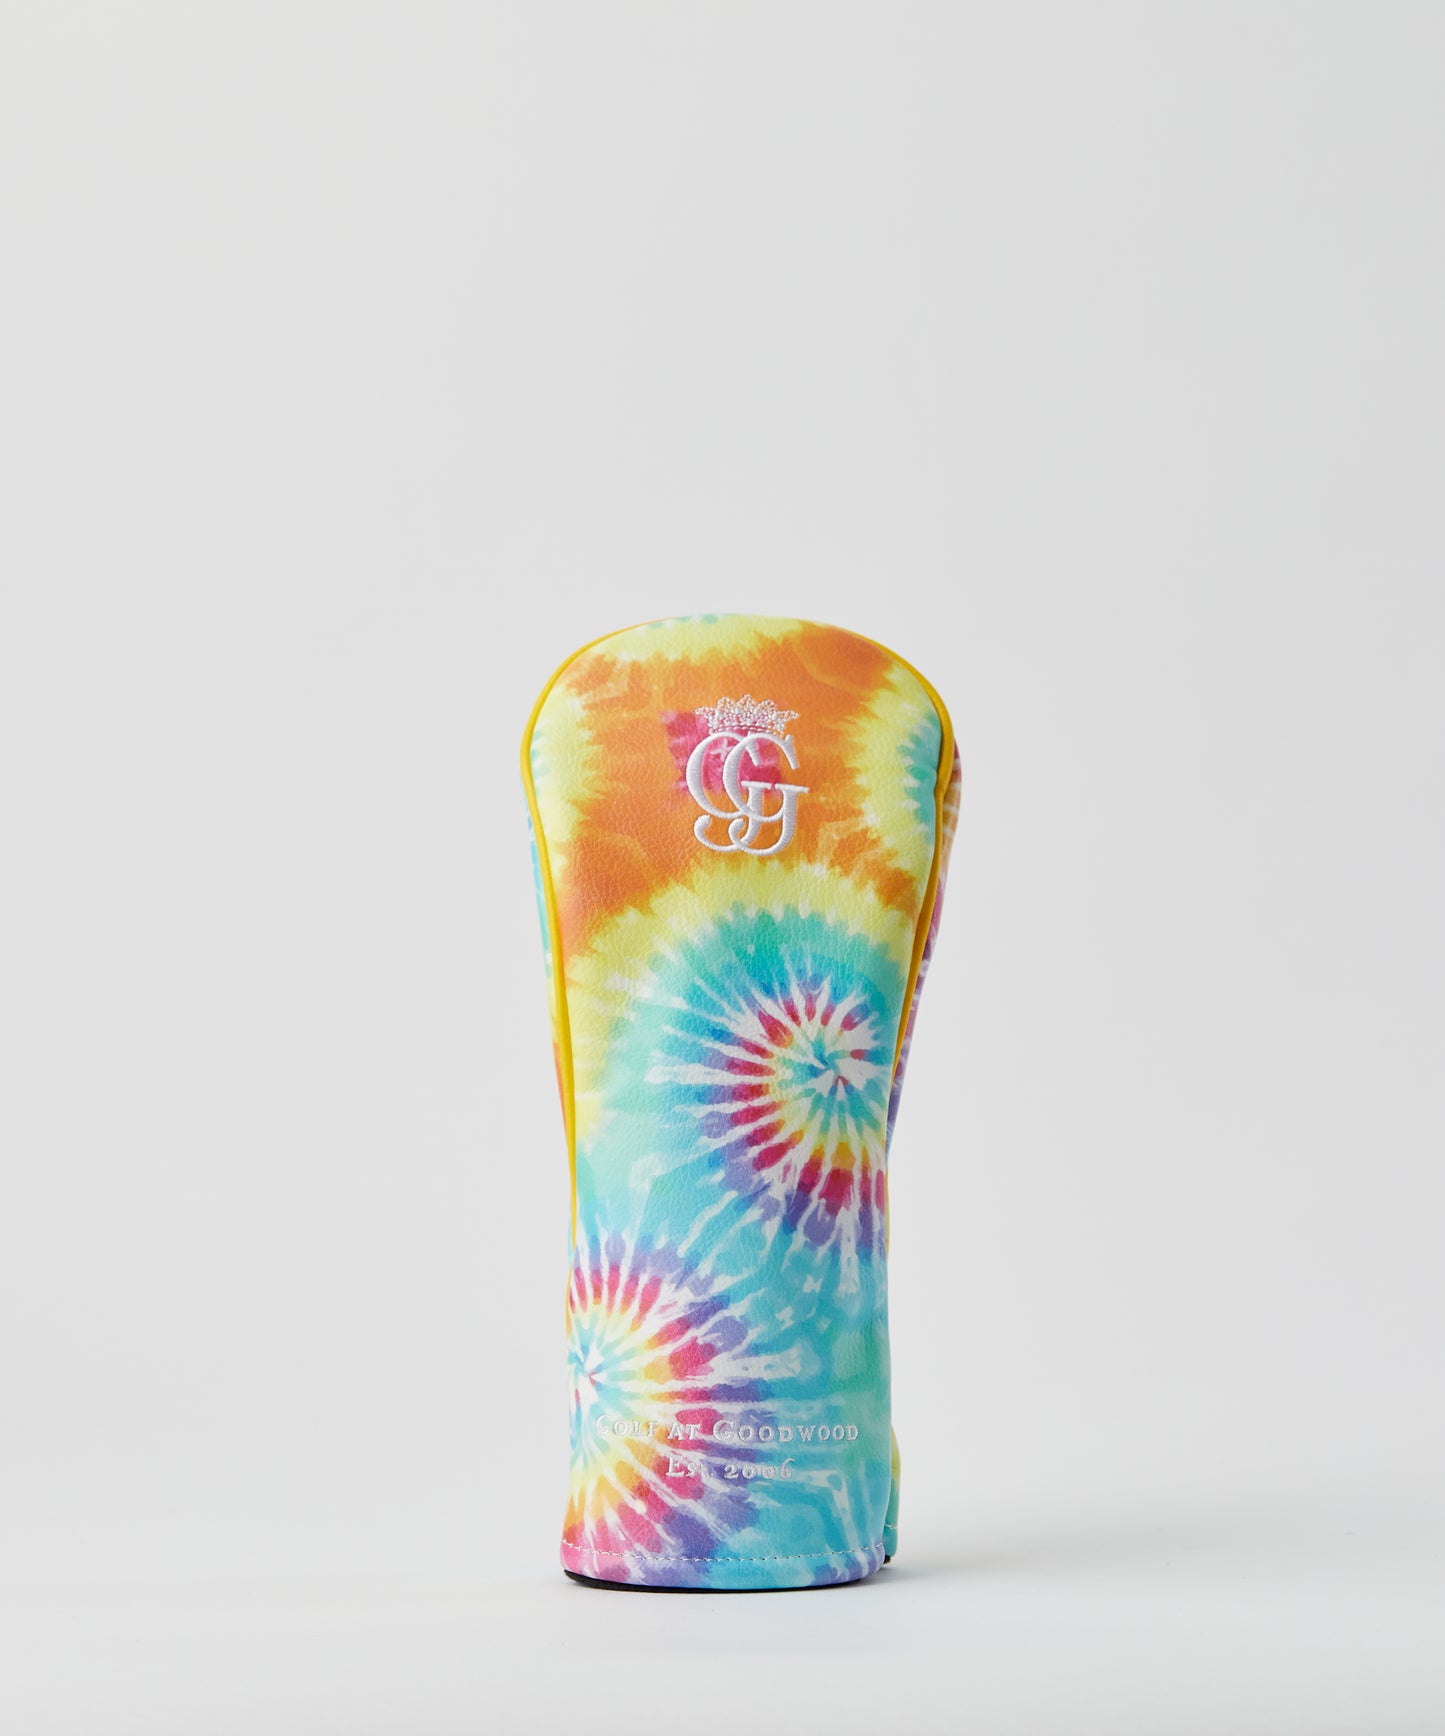 Goodwood Golf Rescue Head Cover - Tie Dye